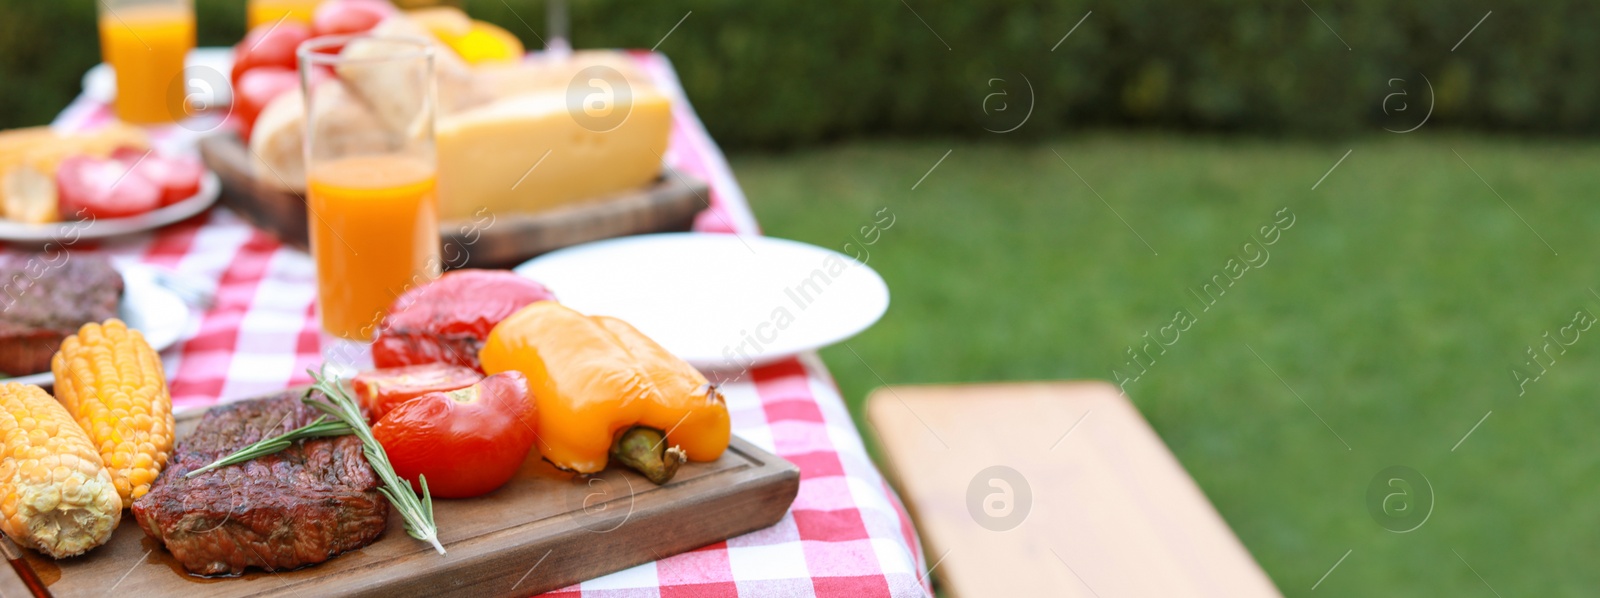 Image of Table with delicious food and drinks outdoors, closeup view with space for text. Banner design